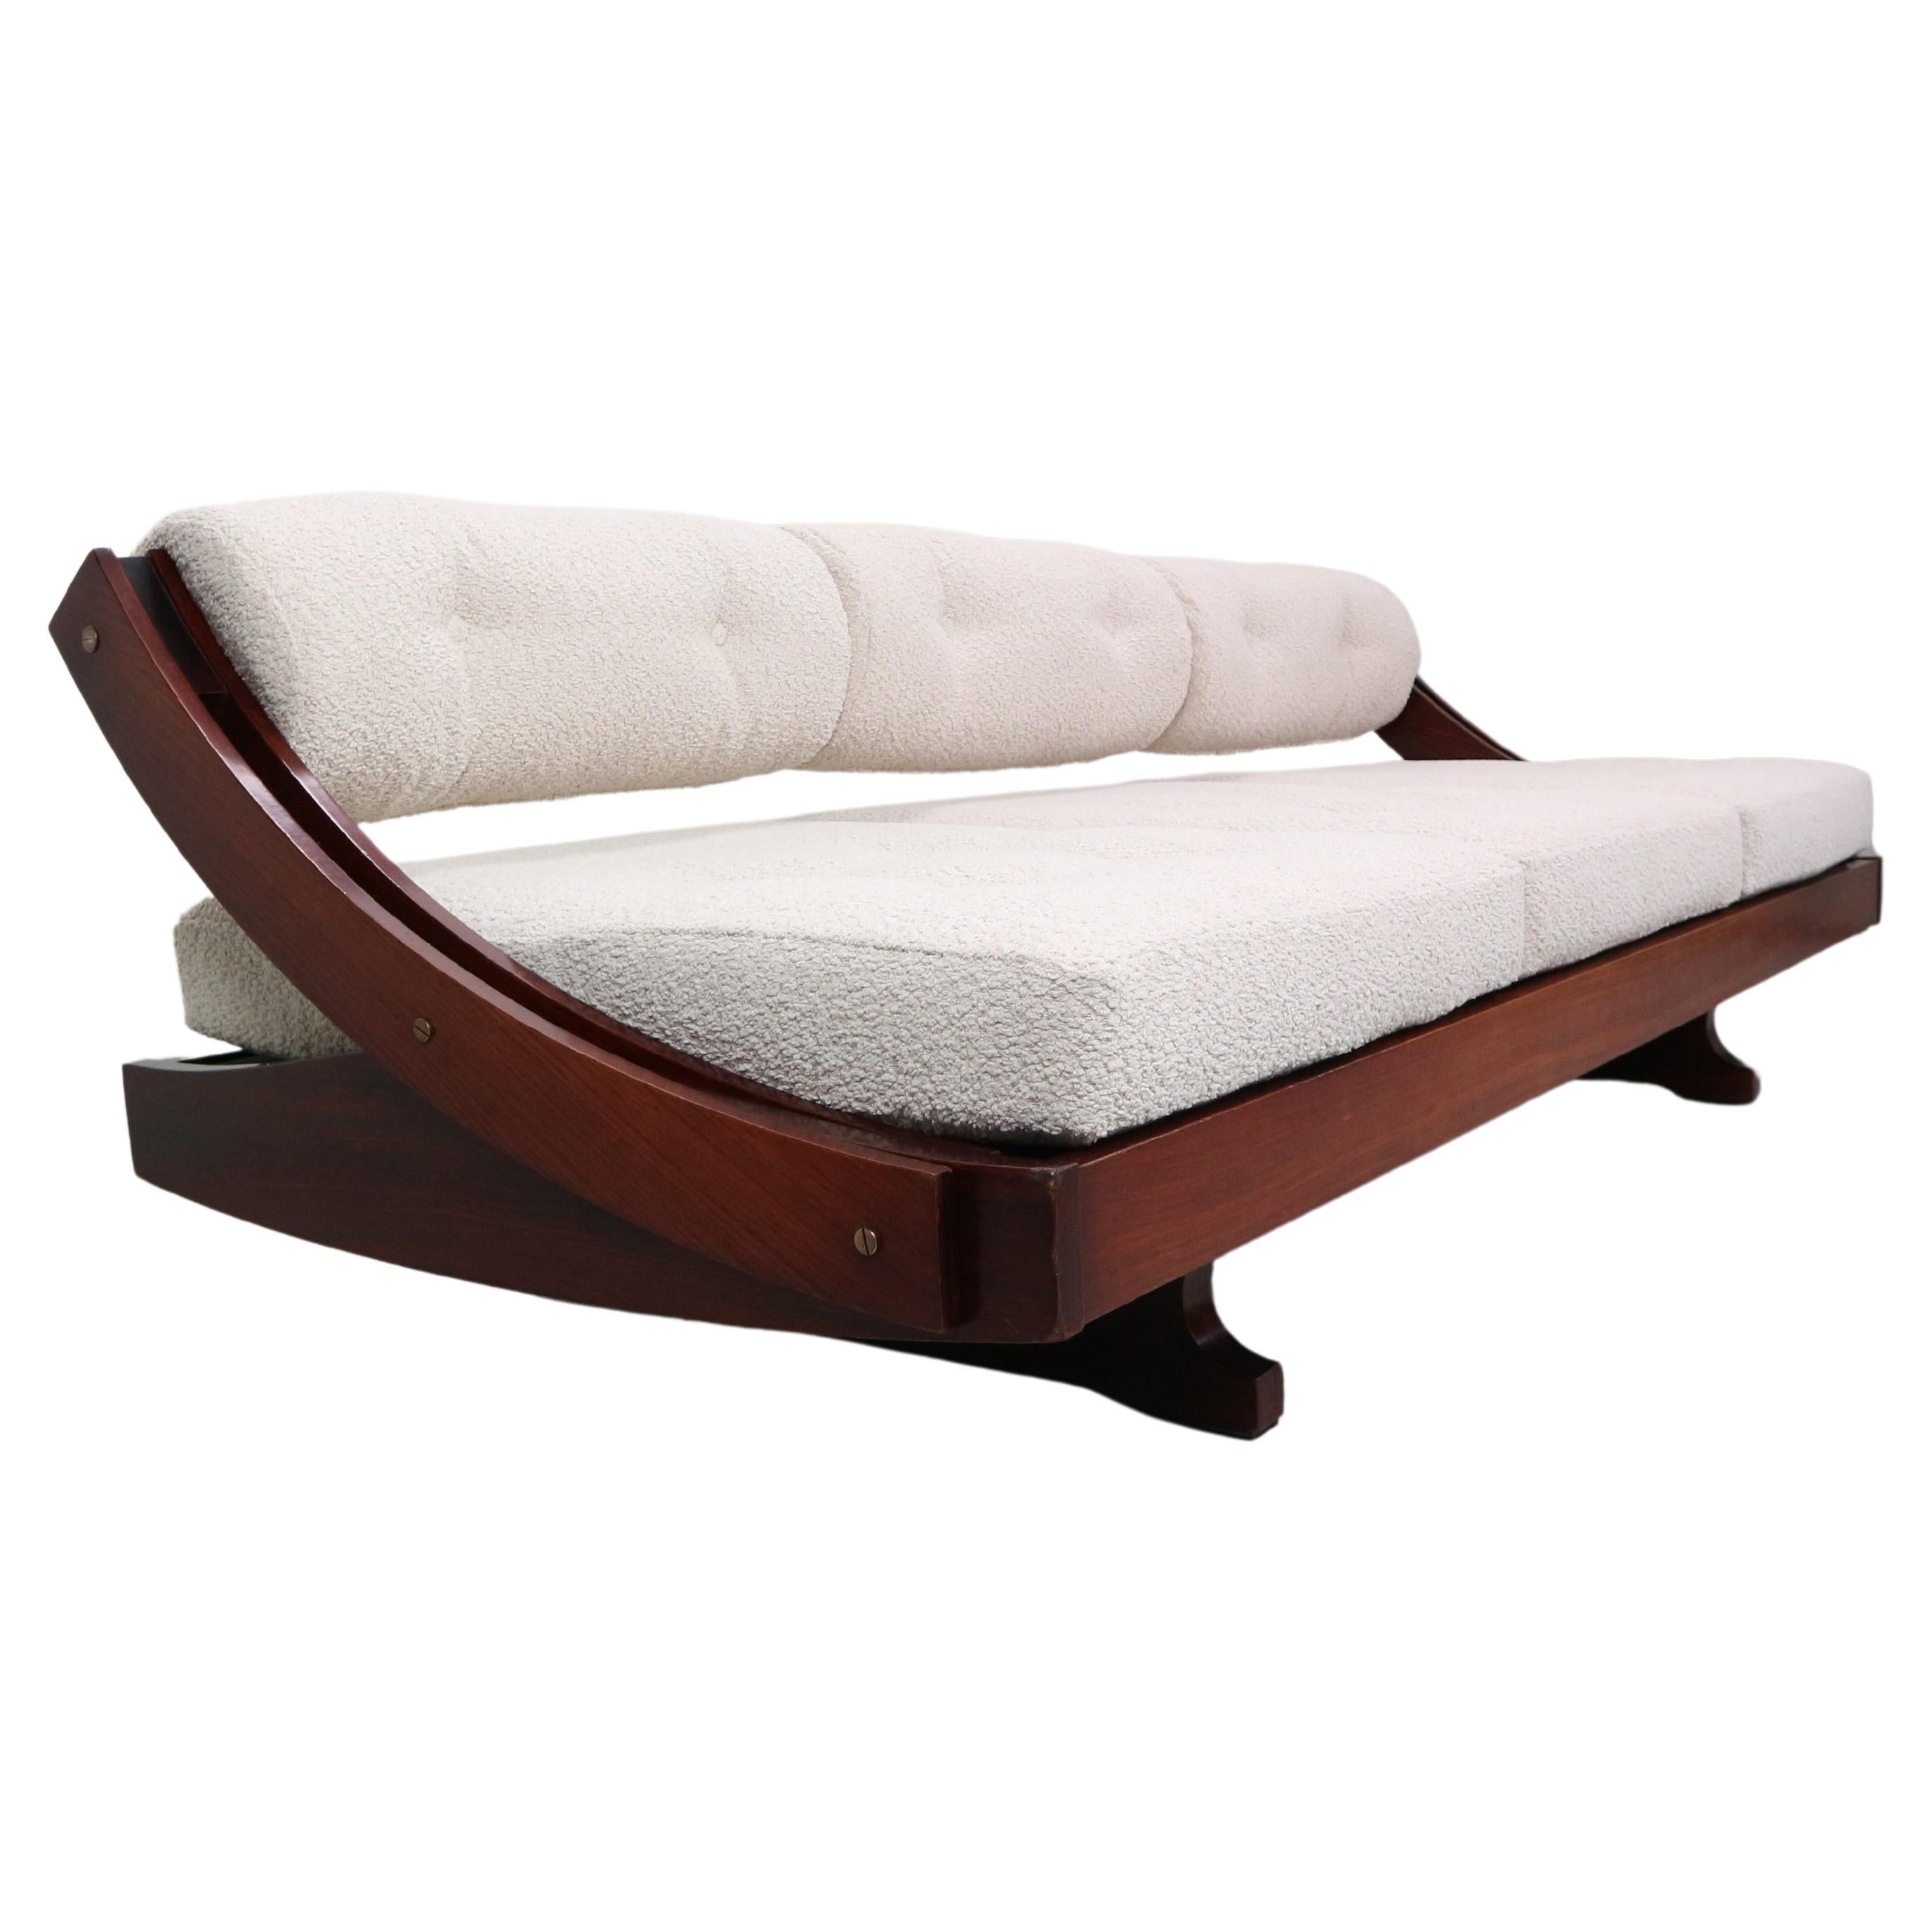 Beautiful GS-195 daybed sofa designed by Gianni Songia for Sormani, Italy, 1963. Very elegant and sculptural rosewood frame with a new off-white boucle upholstery. The back rest can be adjusted in two positions to use as a sofa or daybed and is